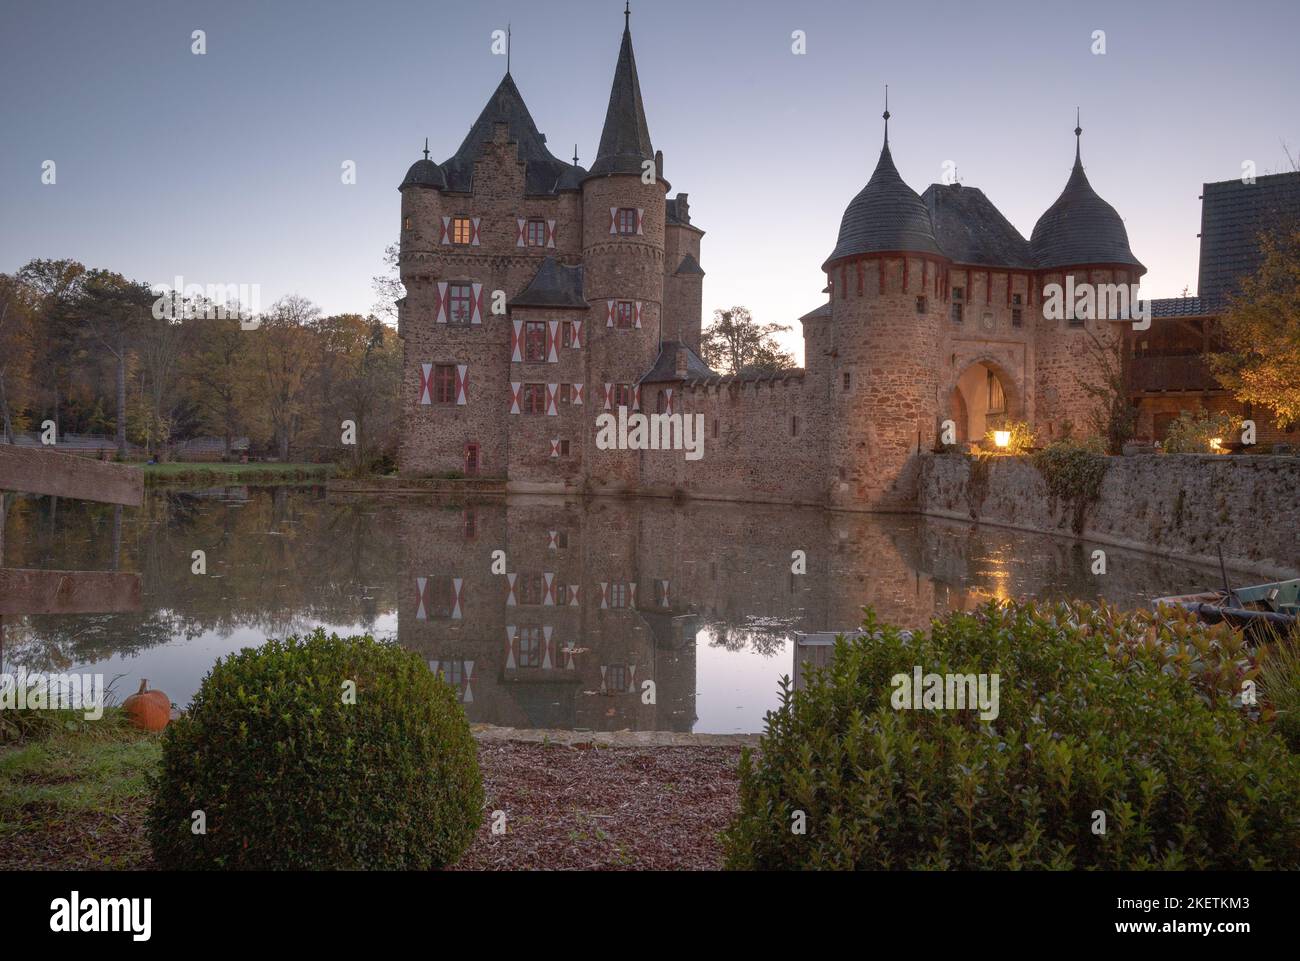 Mechernich november 2022; Satzvey Castle is a medieval moated castle, initially from the 12th century, and is located on the north-eastern edge of the Stock Photo